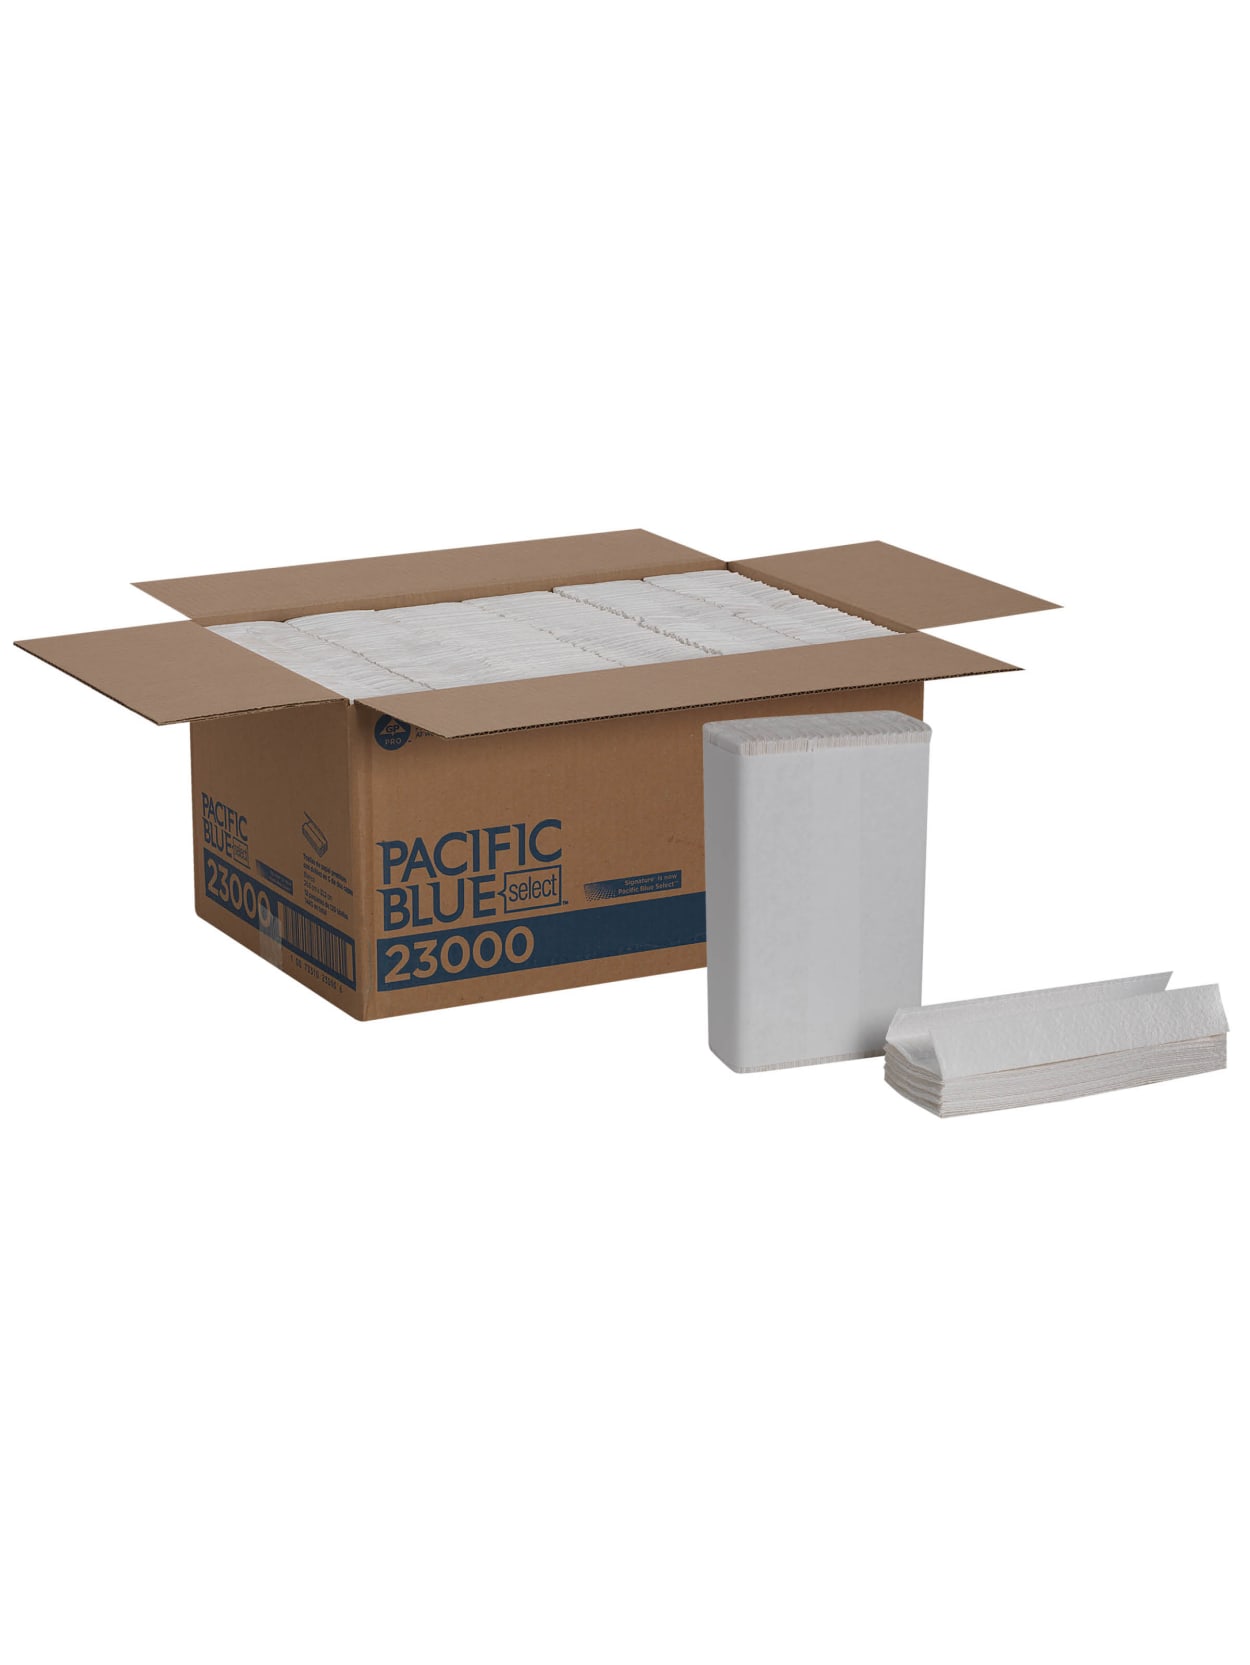 Pacific Blue Select By Gp Pro Premium C Fold 2 Ply Paper Towels 1 Sheets Per Pack 12 Packs Per Case Office Depot